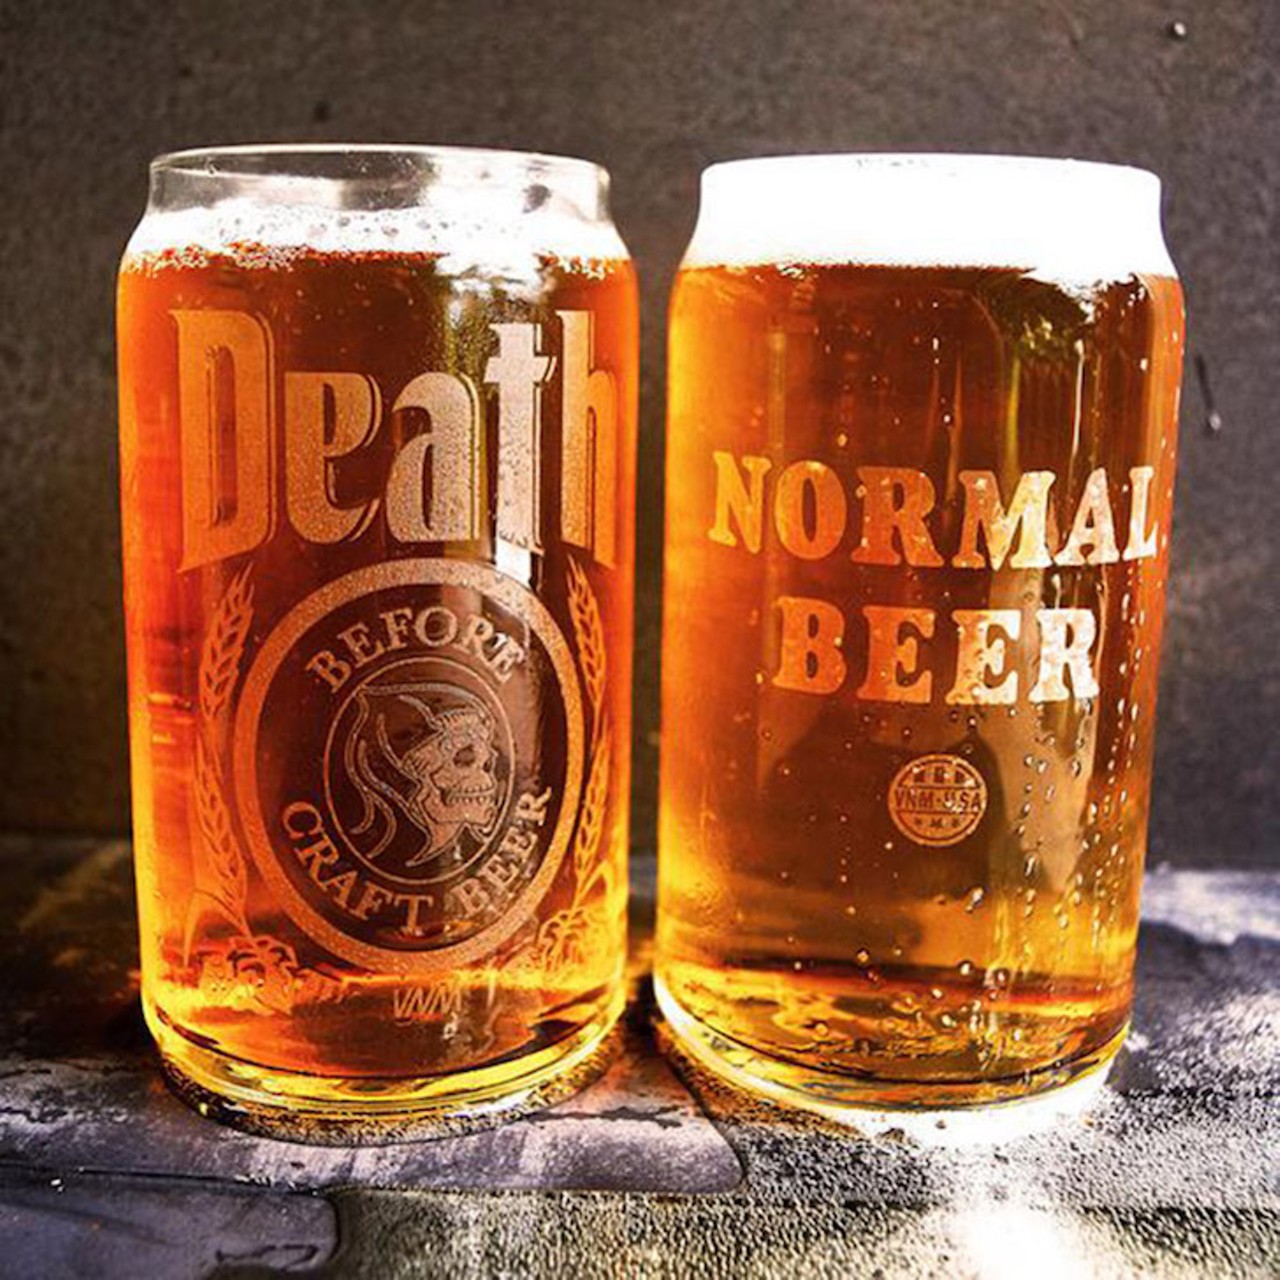  Death Before Craft Beer can glass set, $19 per pair, thevnm.com
Yes, craft beer can get you drunk faster than good old domestic brews, but with those high ABVs and a higher price point, you're not going to be able to maintain the mid-level buzz you're gonna need to get yourself through to next year if you stick with the fancy stuff. The VNM, local designers of proudly lowbrow apparel and accessories, have you covered with these can-shaped 16-ounce glasses that let you proudly display your preference for the tried-and-true cheap stuff. Warning: will not stop your shitty Tea Party sister-in-law from calling you an "elitist."